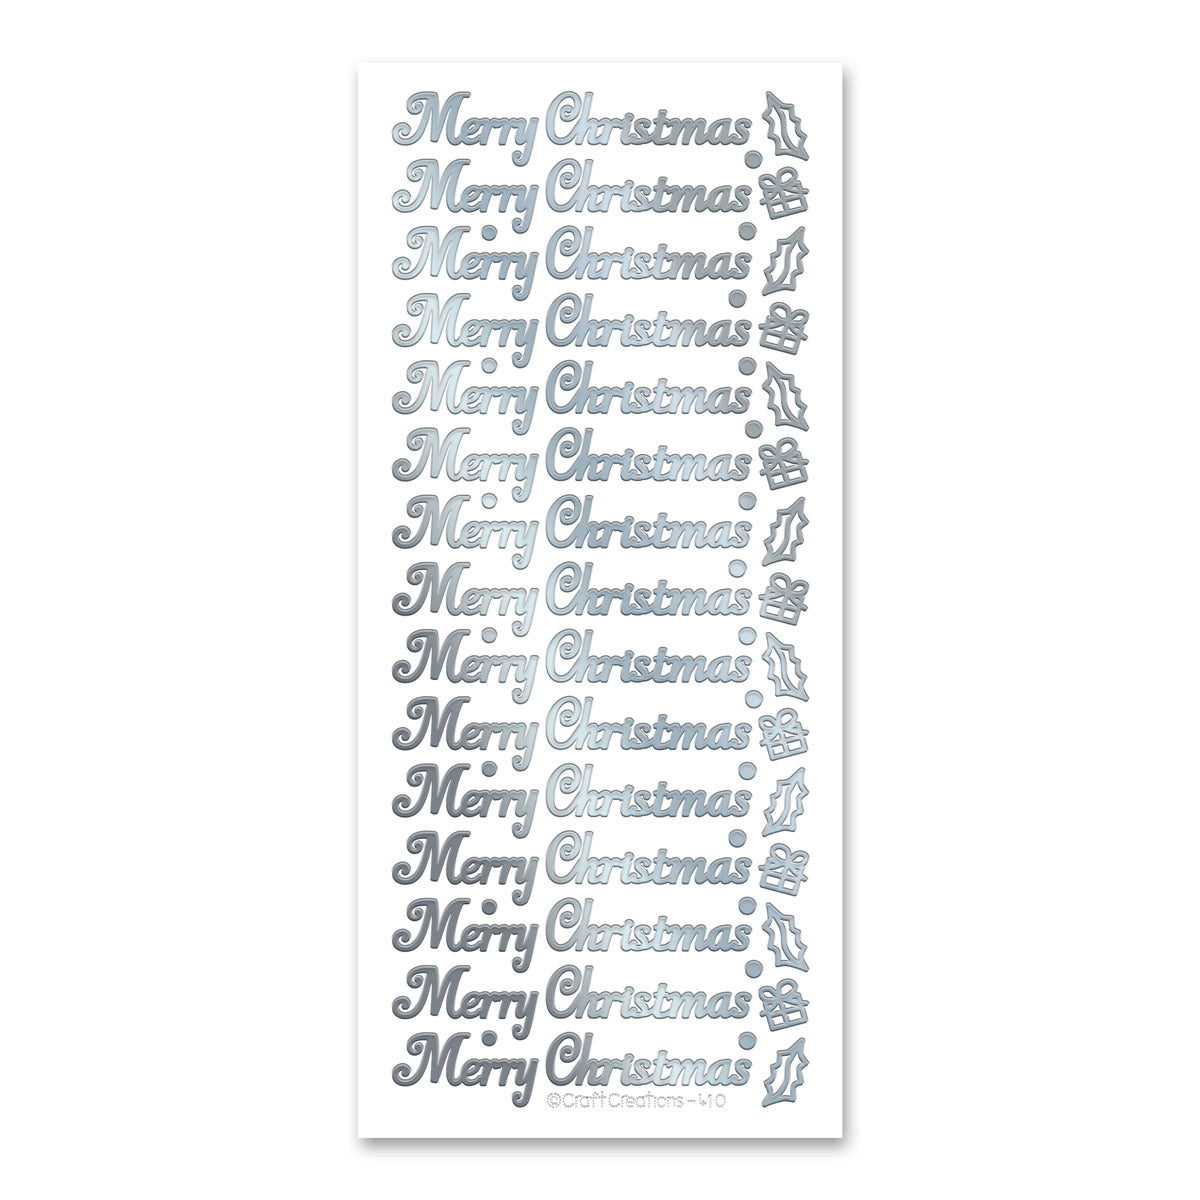 Merry Christmas Silver Self Adhesive Peel Off Stickers